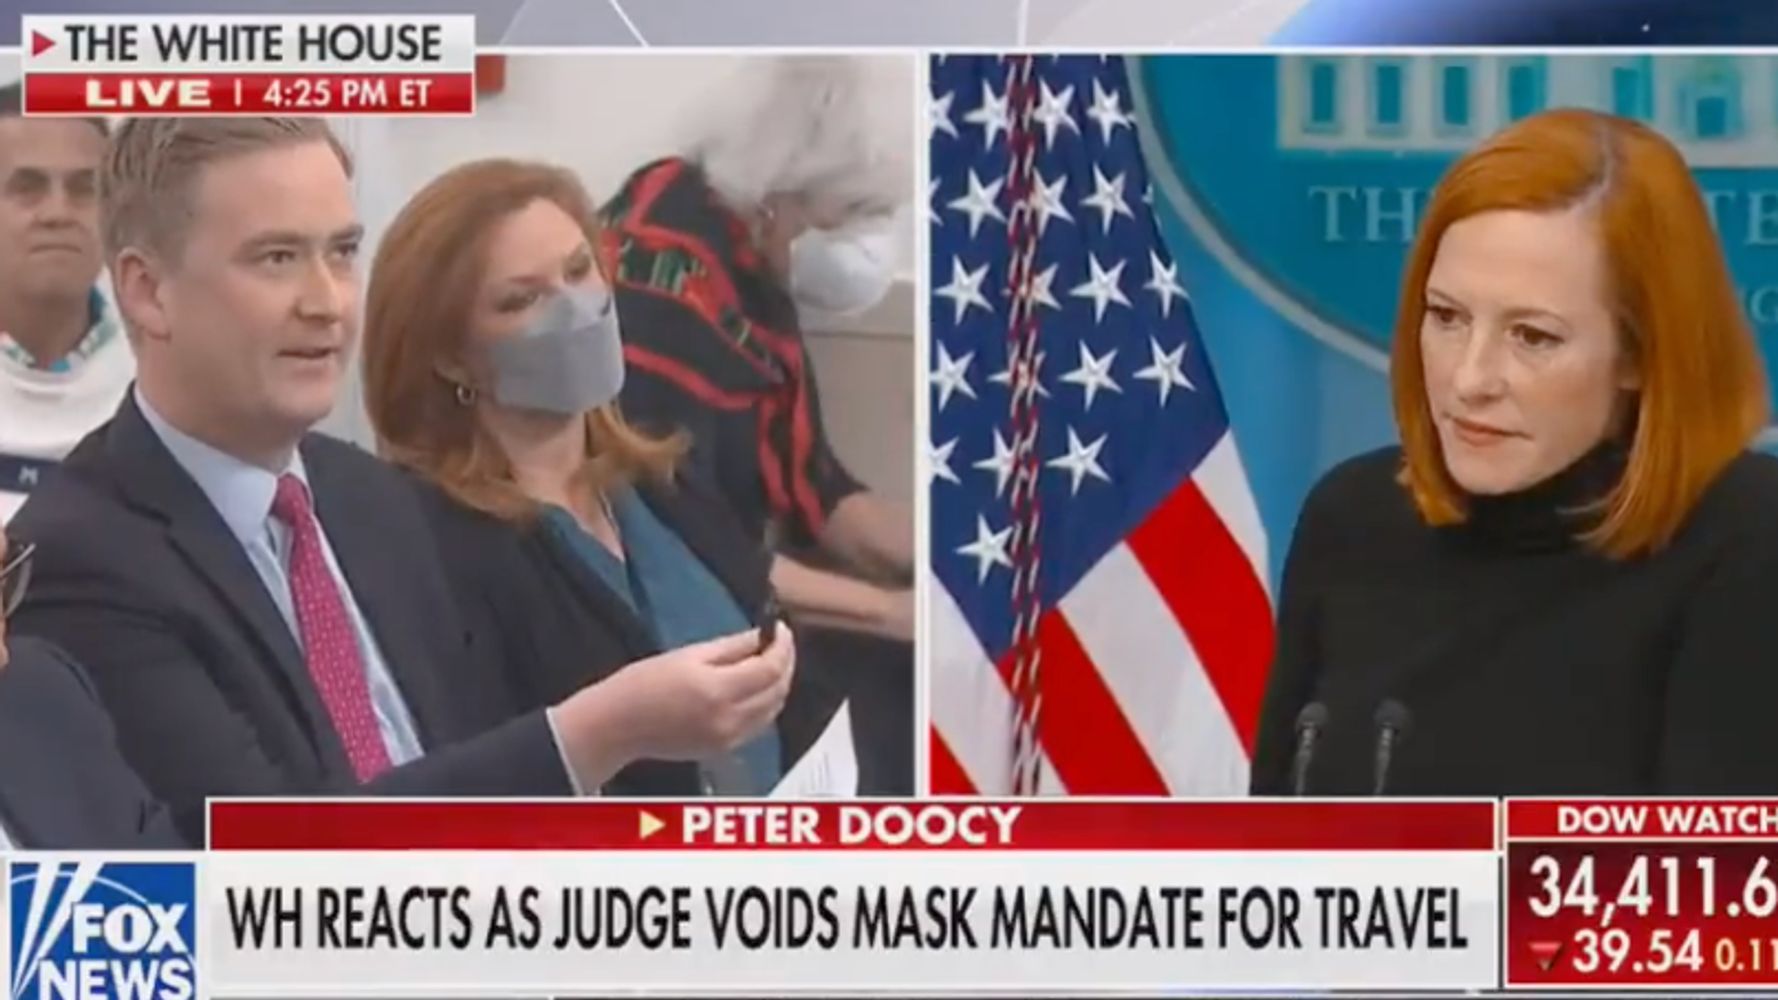 Jen Psaki Ribs Fox’s Peter Doocy: You’re No Doc And Don’t Even (Usually) Play One On TV